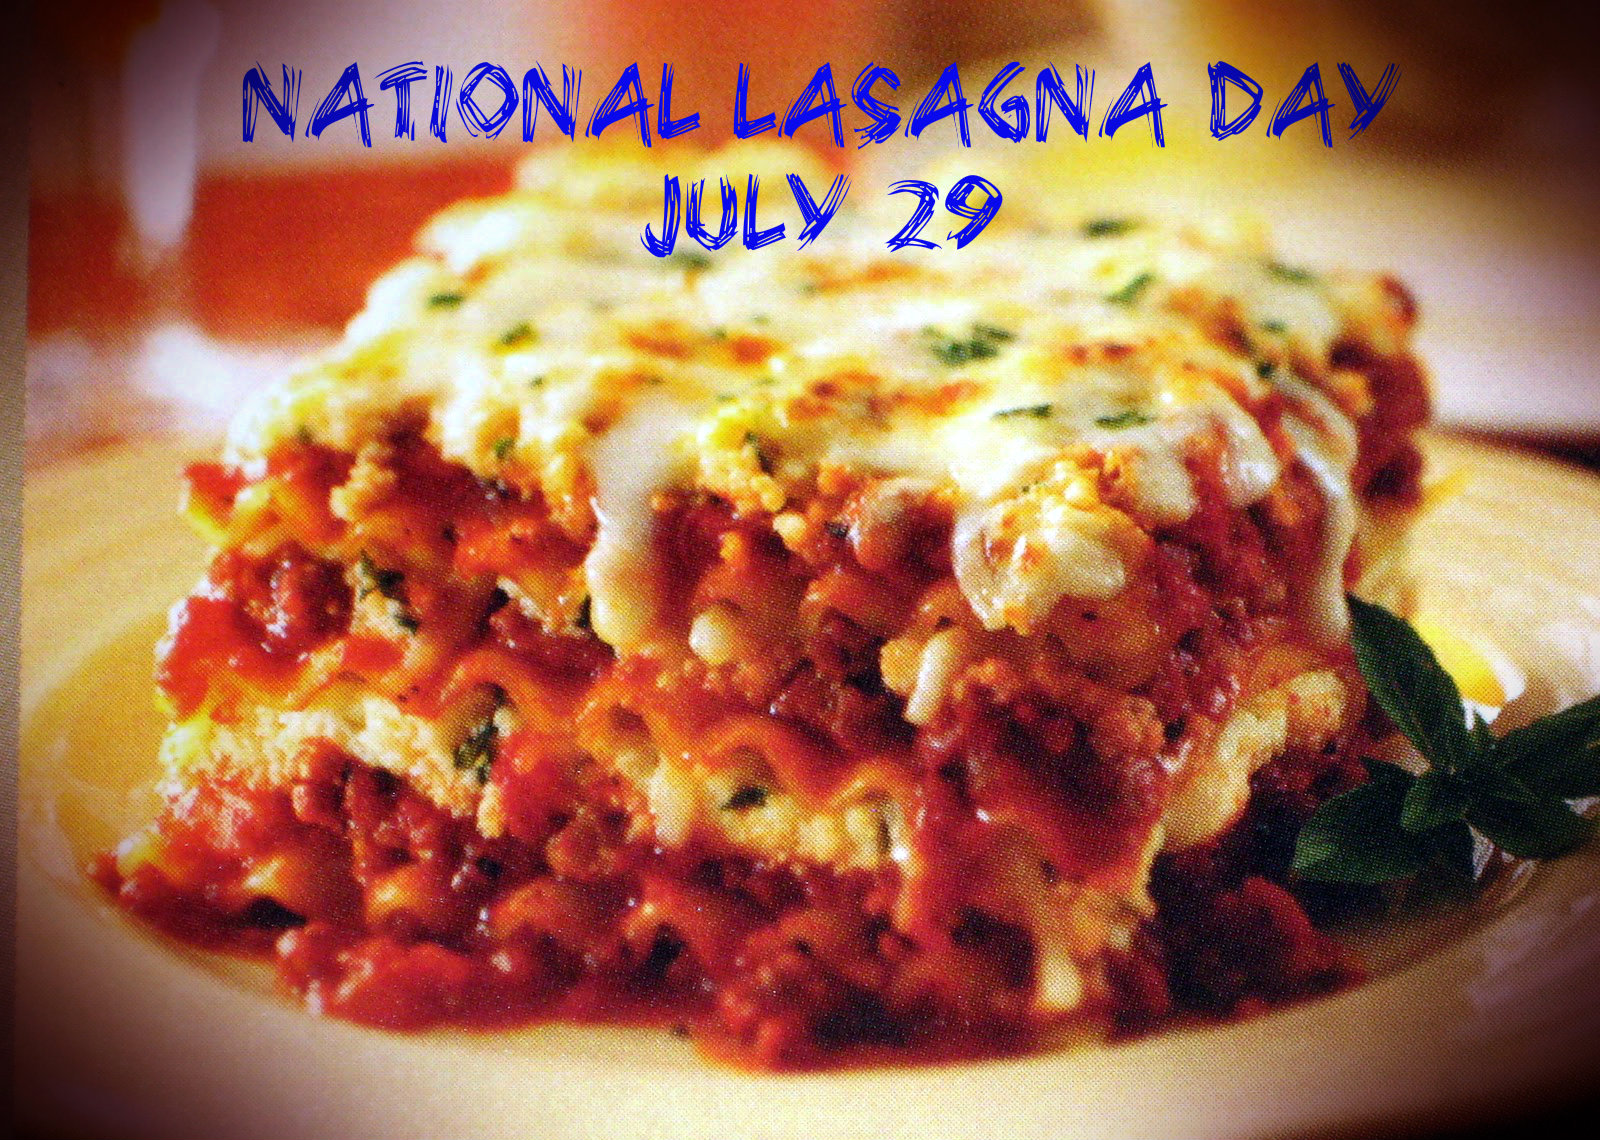 Celebrate National Lasagne Day with FREE Lasagne from Carrabba's ...